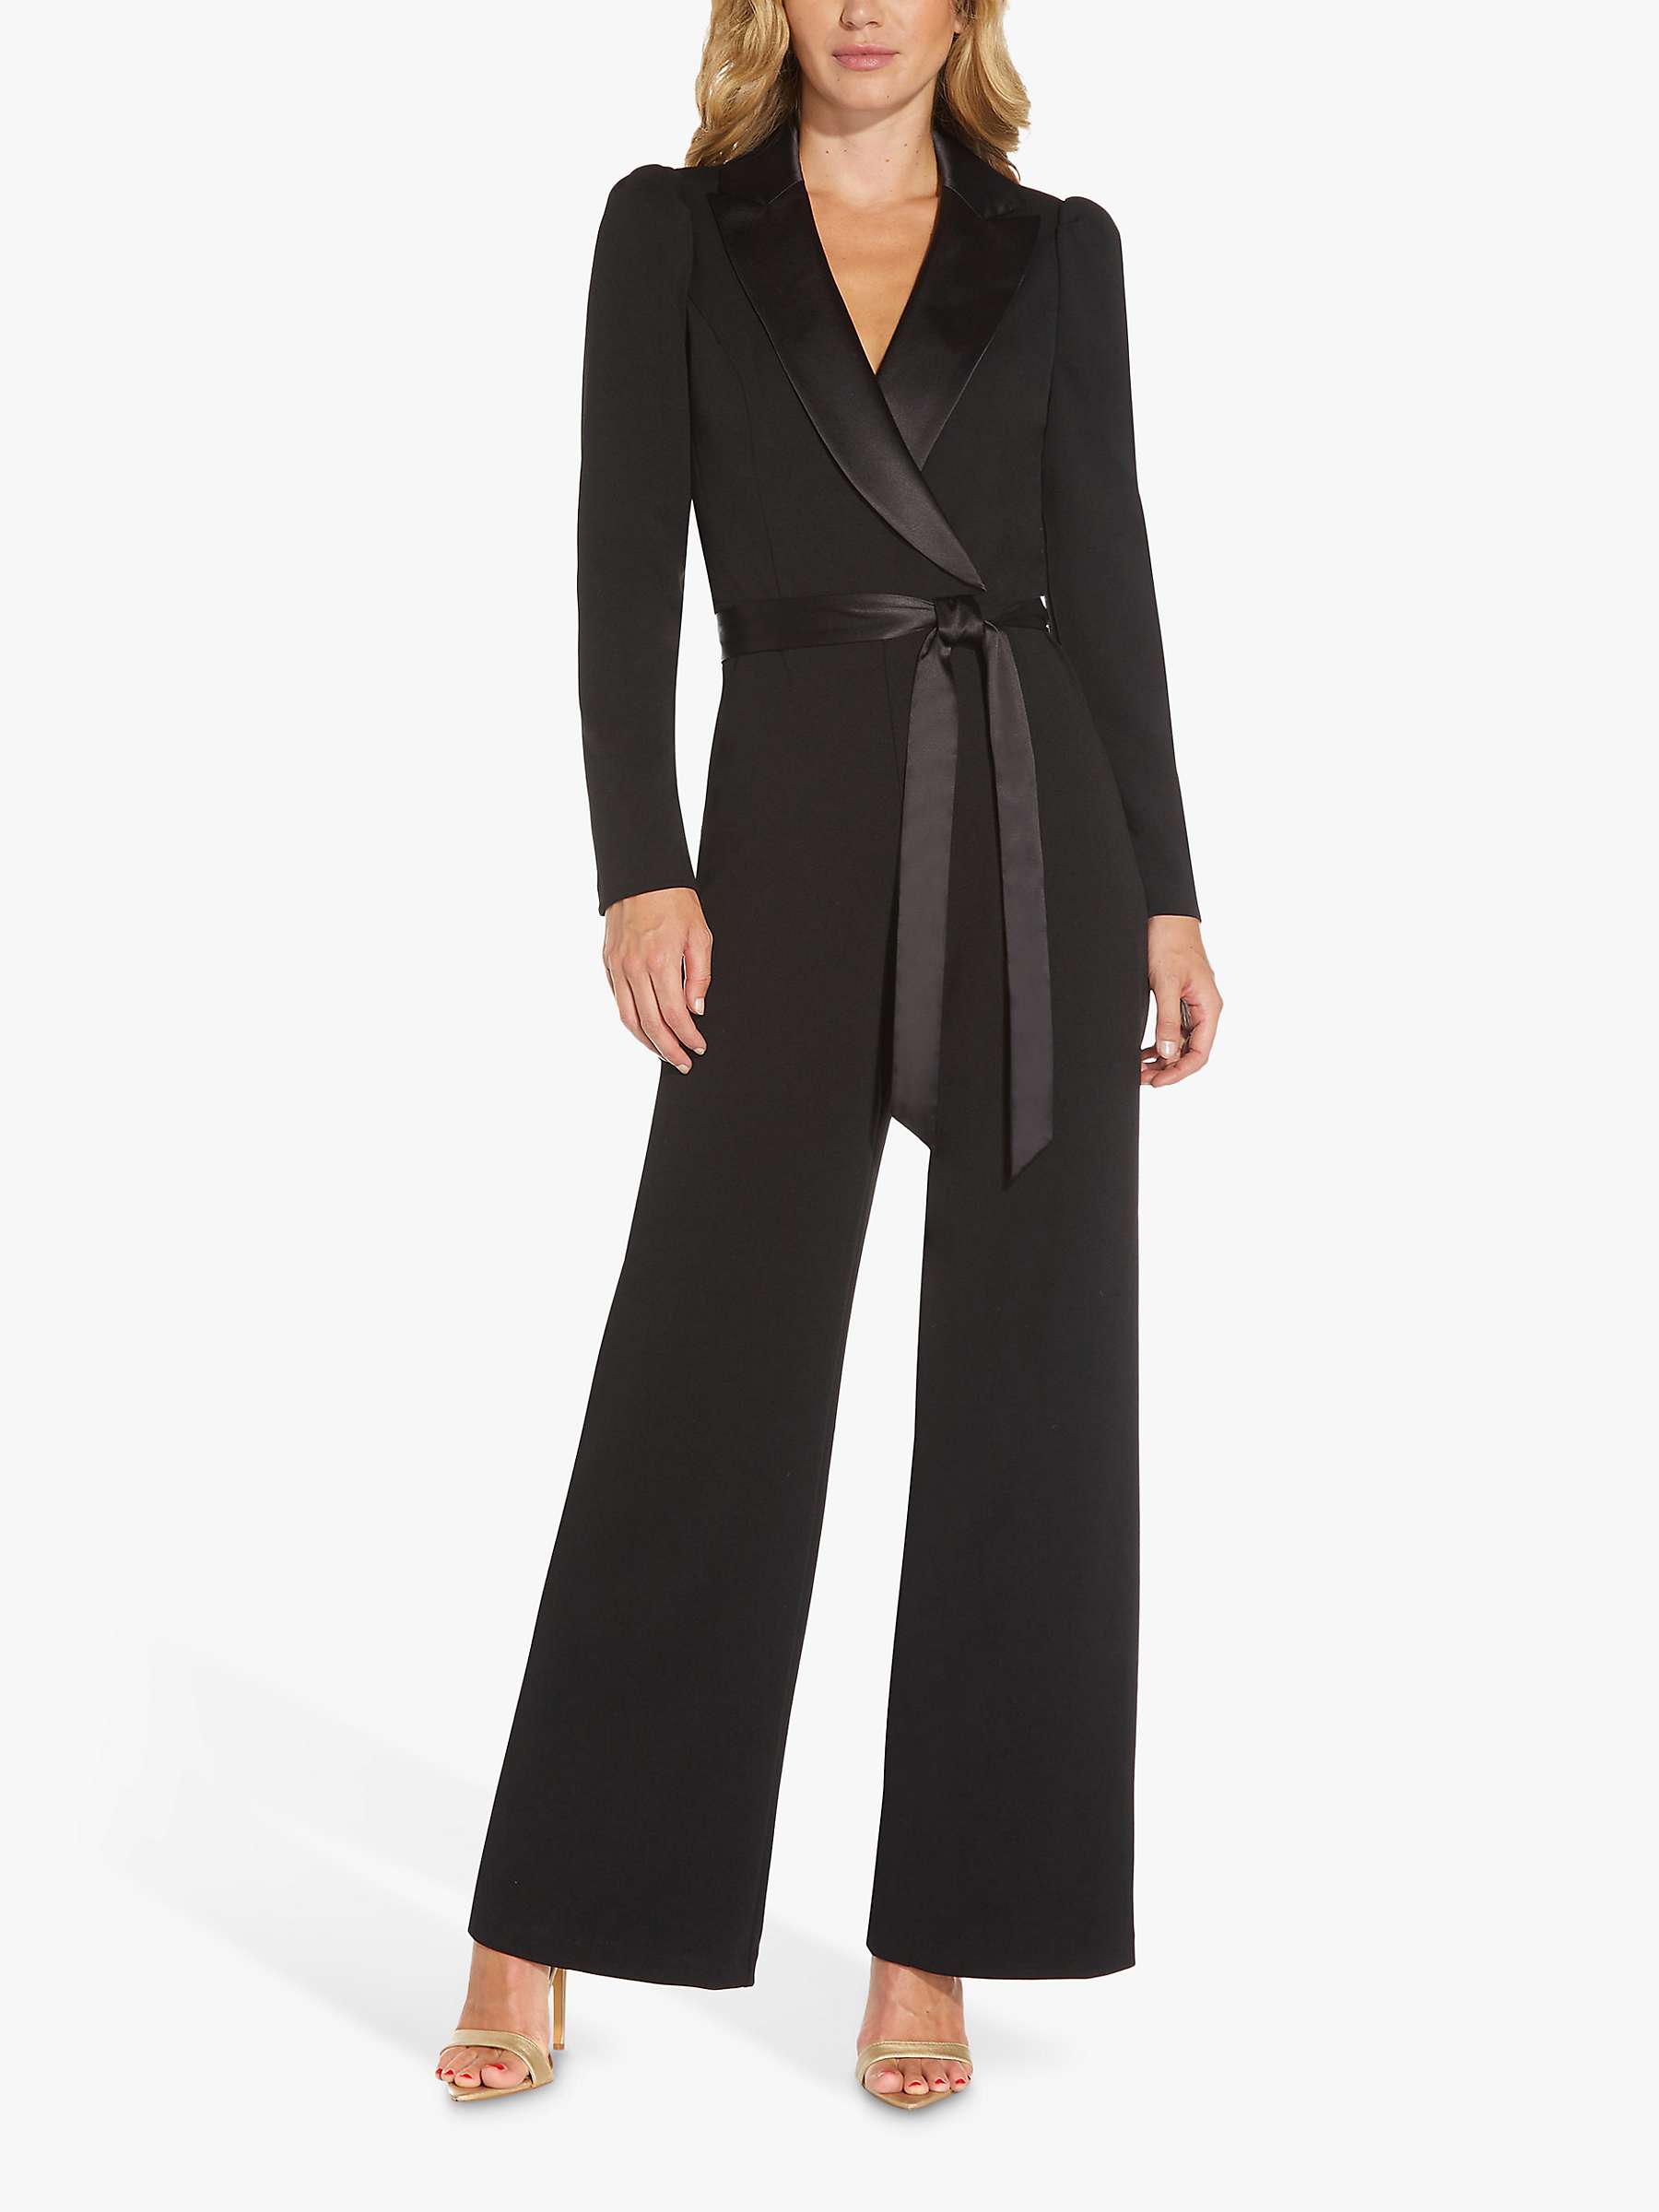 Buy Adrianna Papell Knit Crepe Tuxedo Jumpsuit Online at johnlewis.com